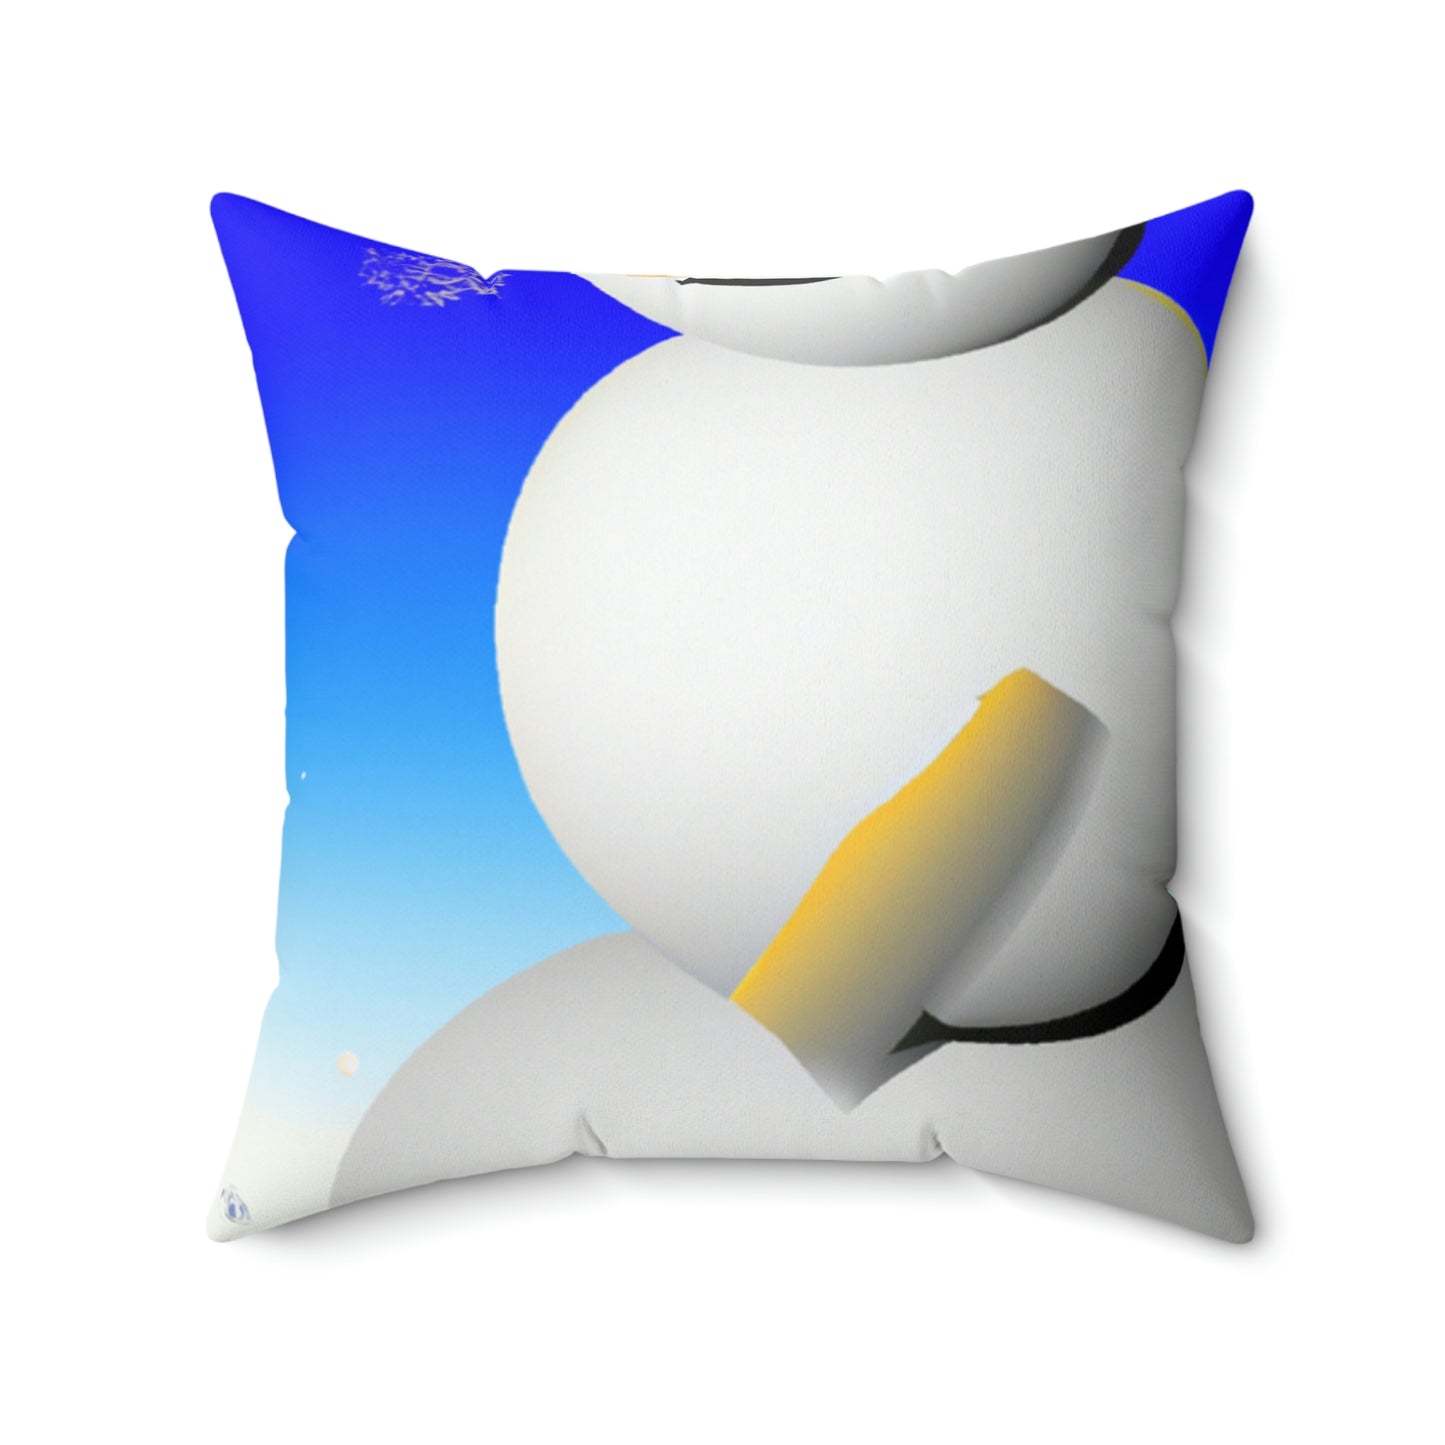 "A Cold Solace" - The Alien Square Pillow